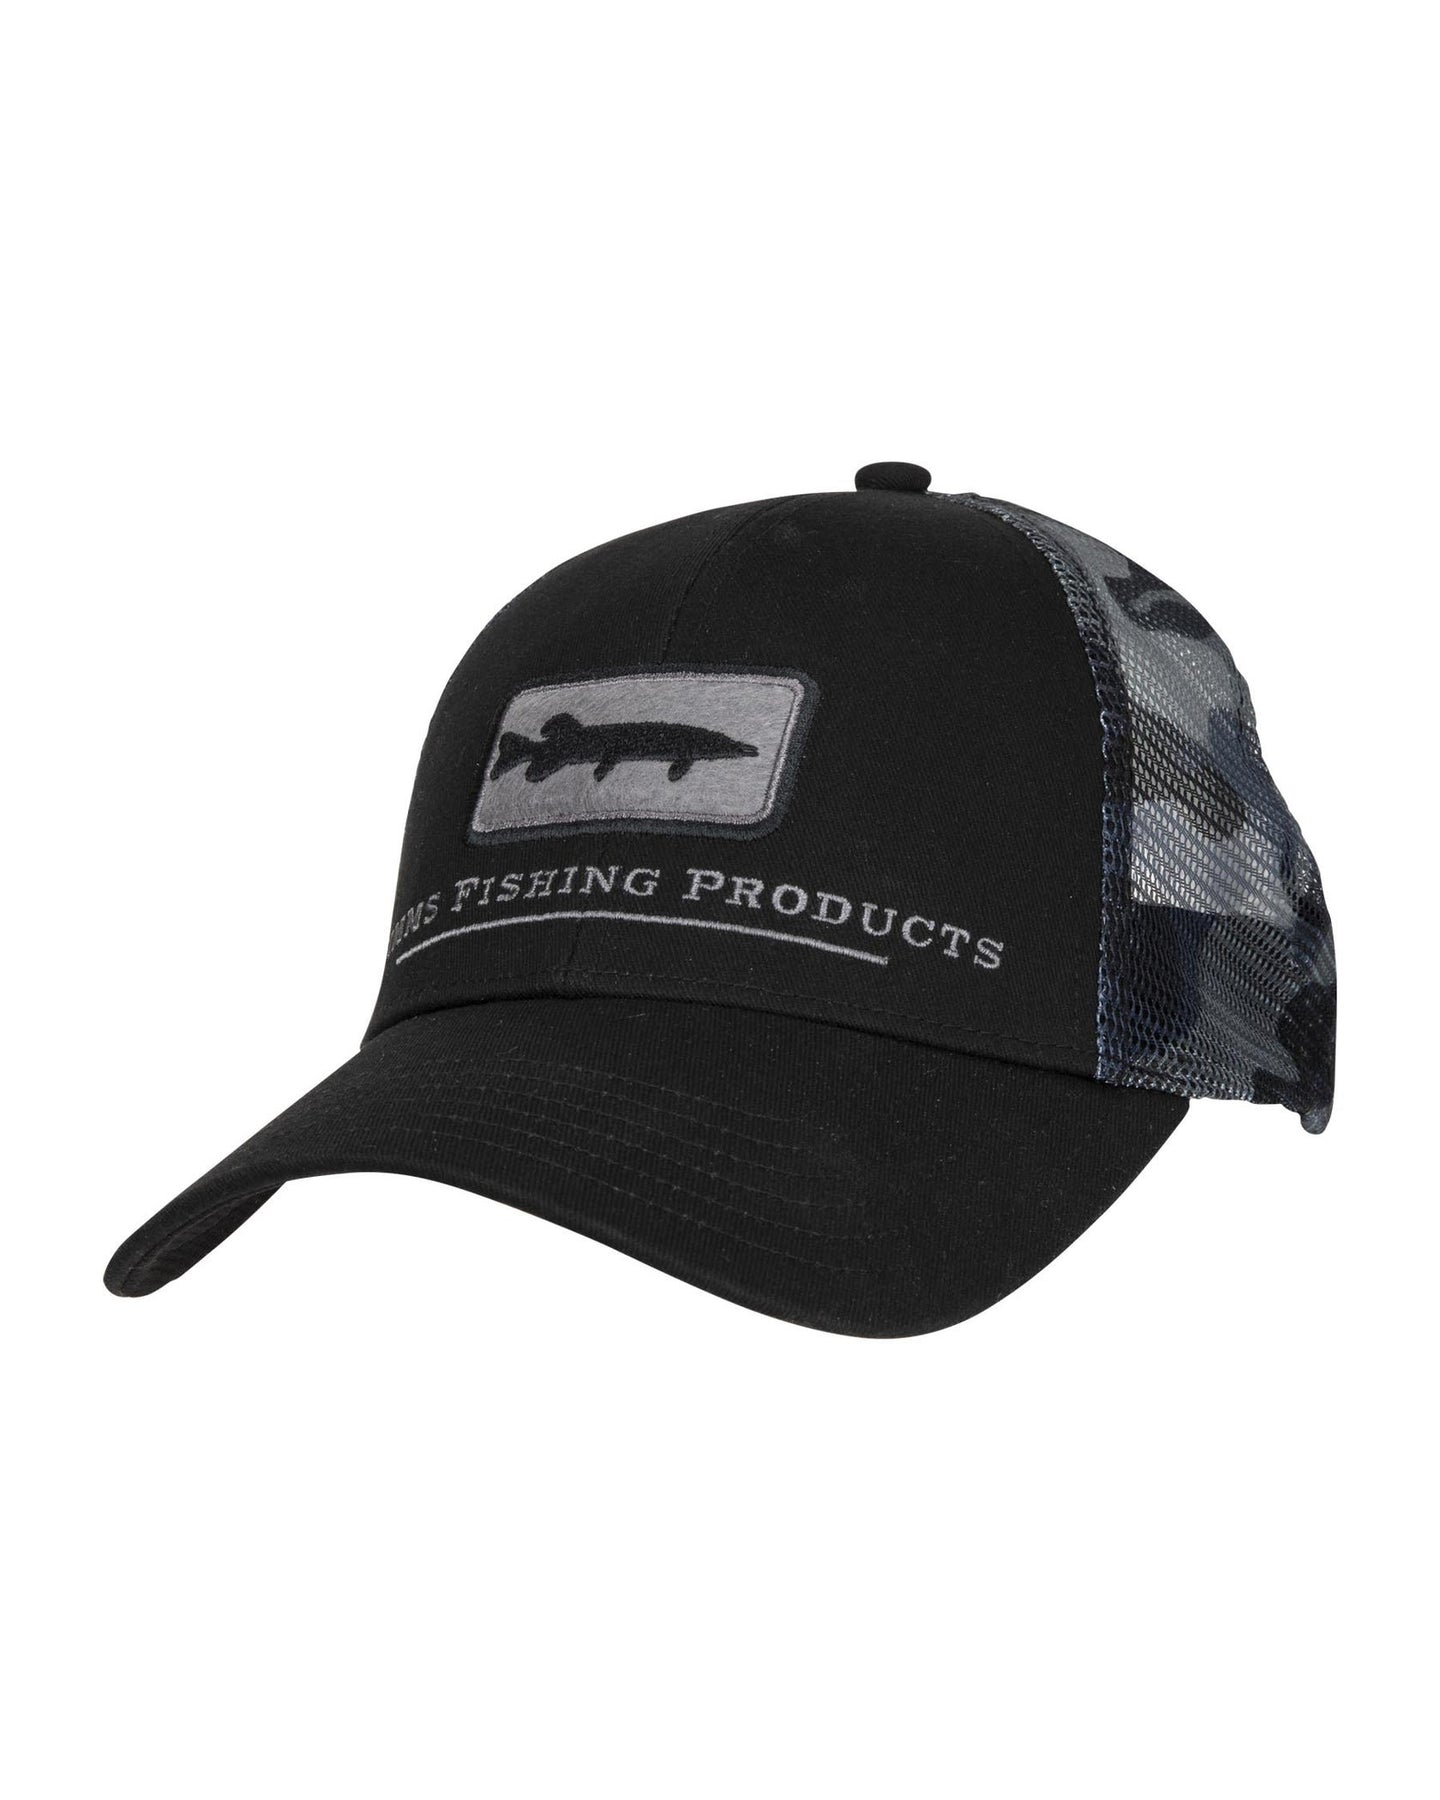 One (1) Simms Fishing Hat Bass Icon Trucker Woodland Camo Cap NWT Low Crown